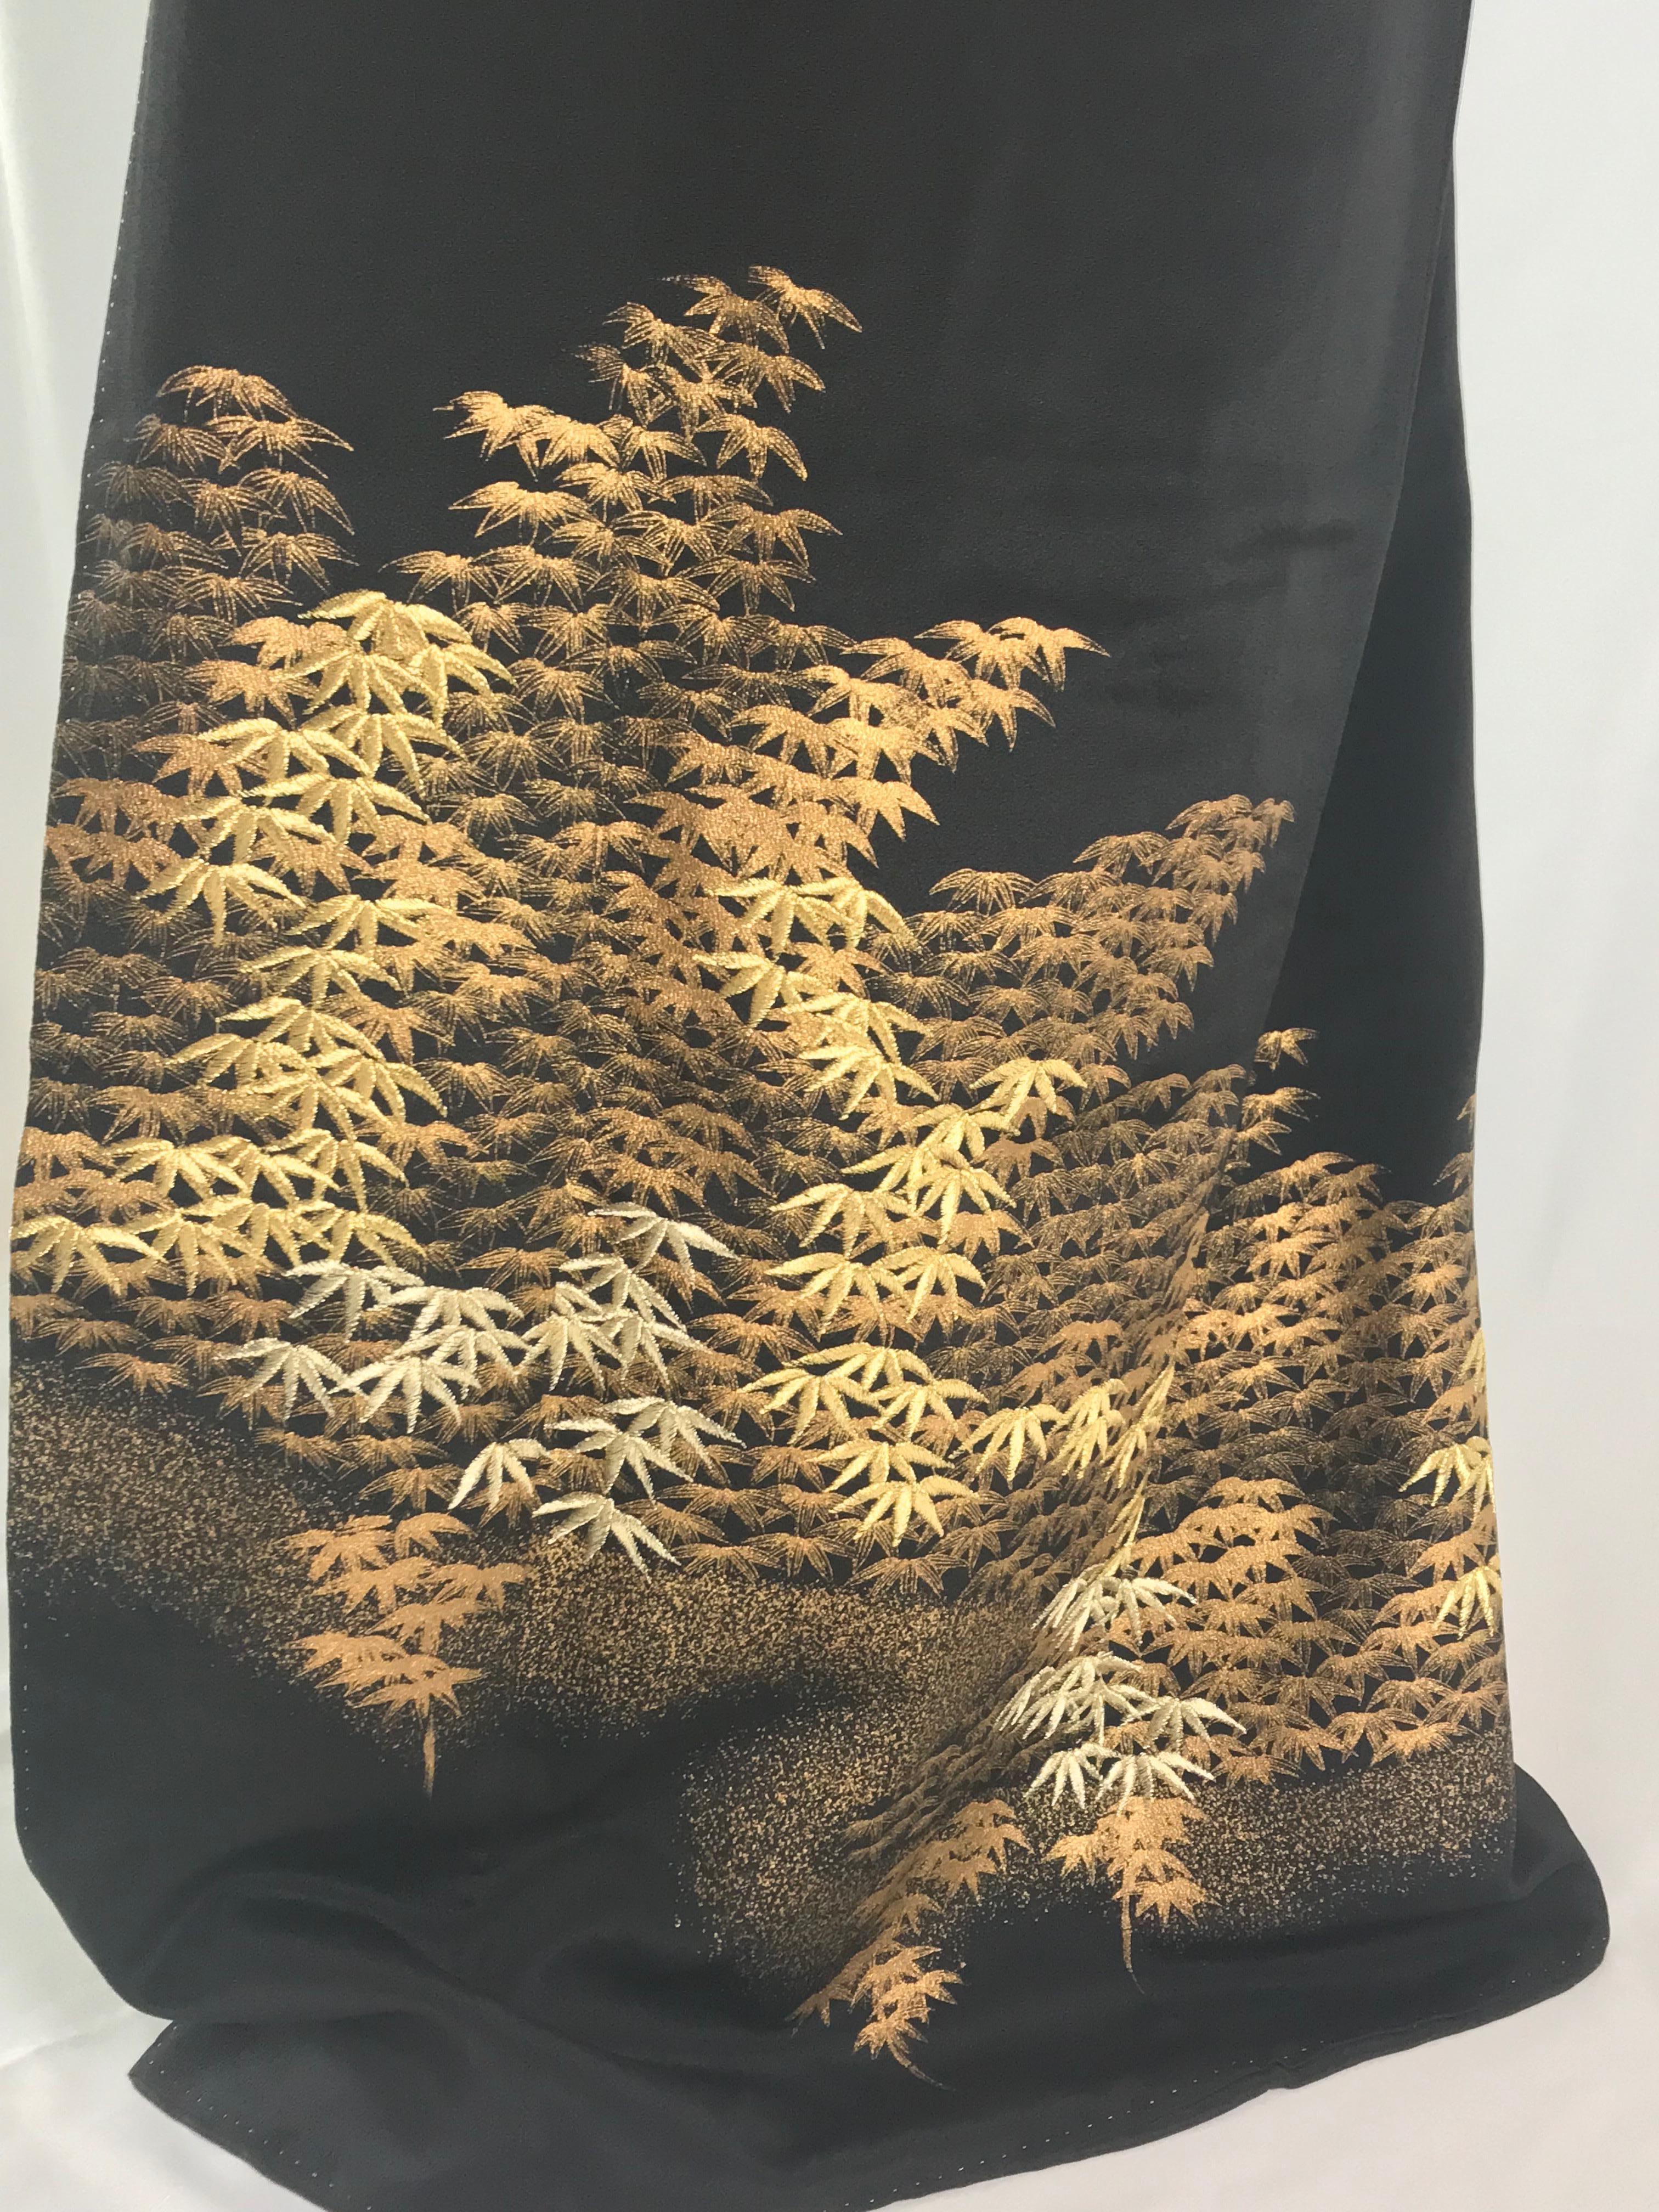 Embroidered and painted with golden maple trees.
About
●	Size estimate: One size fits most. Model is a size 10 but also looks great on a size 14.
●	Loose fitting that flatters most figures.
●	Bust: up to 40 inches
●	Full Length 164